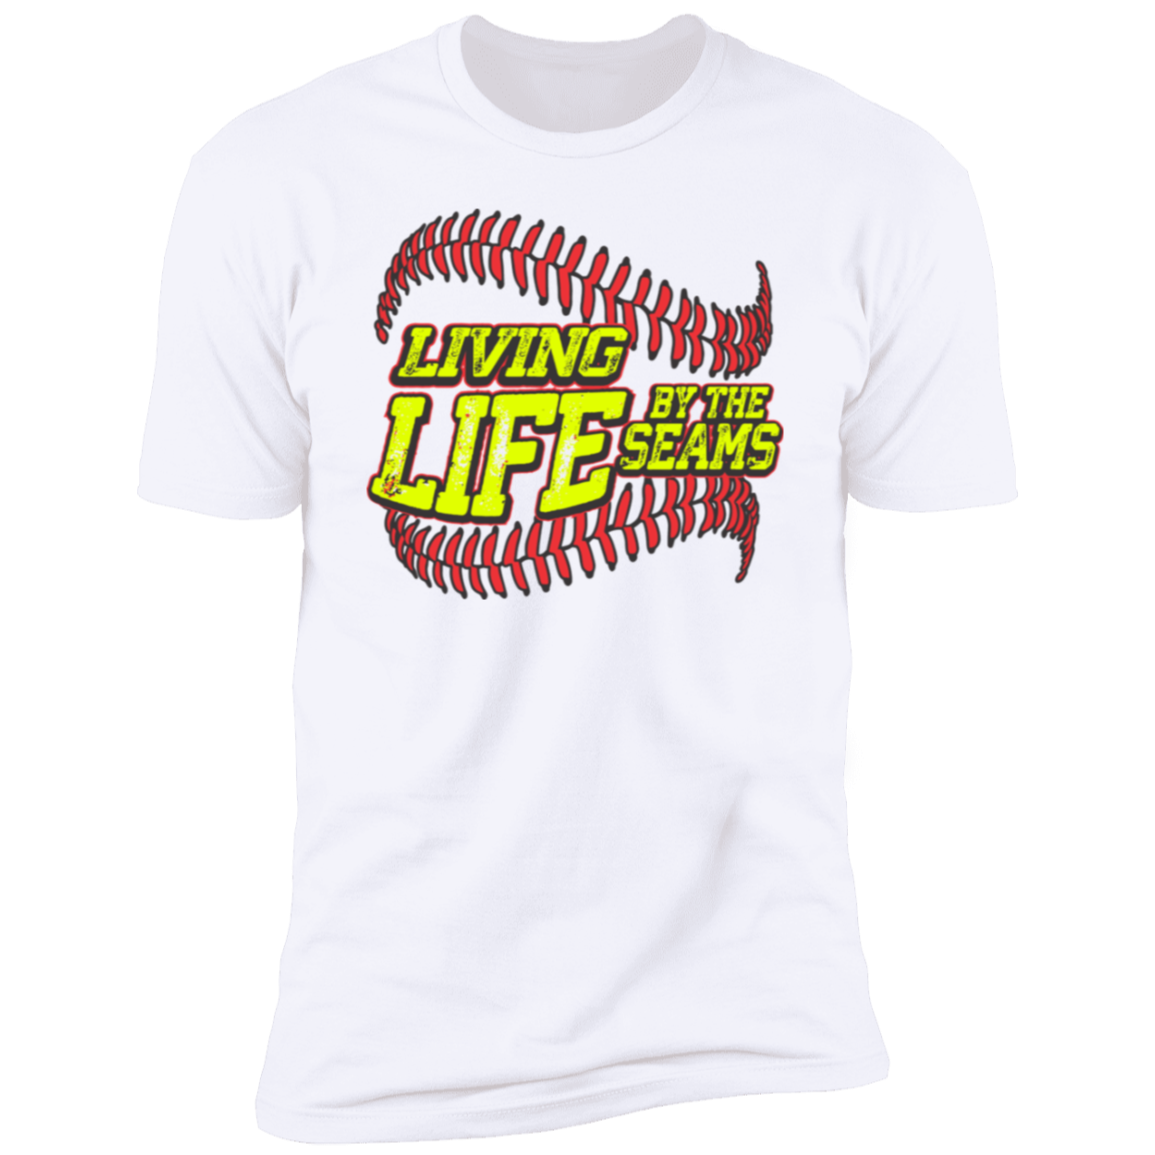 Life by the seams Softball Premium Men's Tee - Game Day Getup